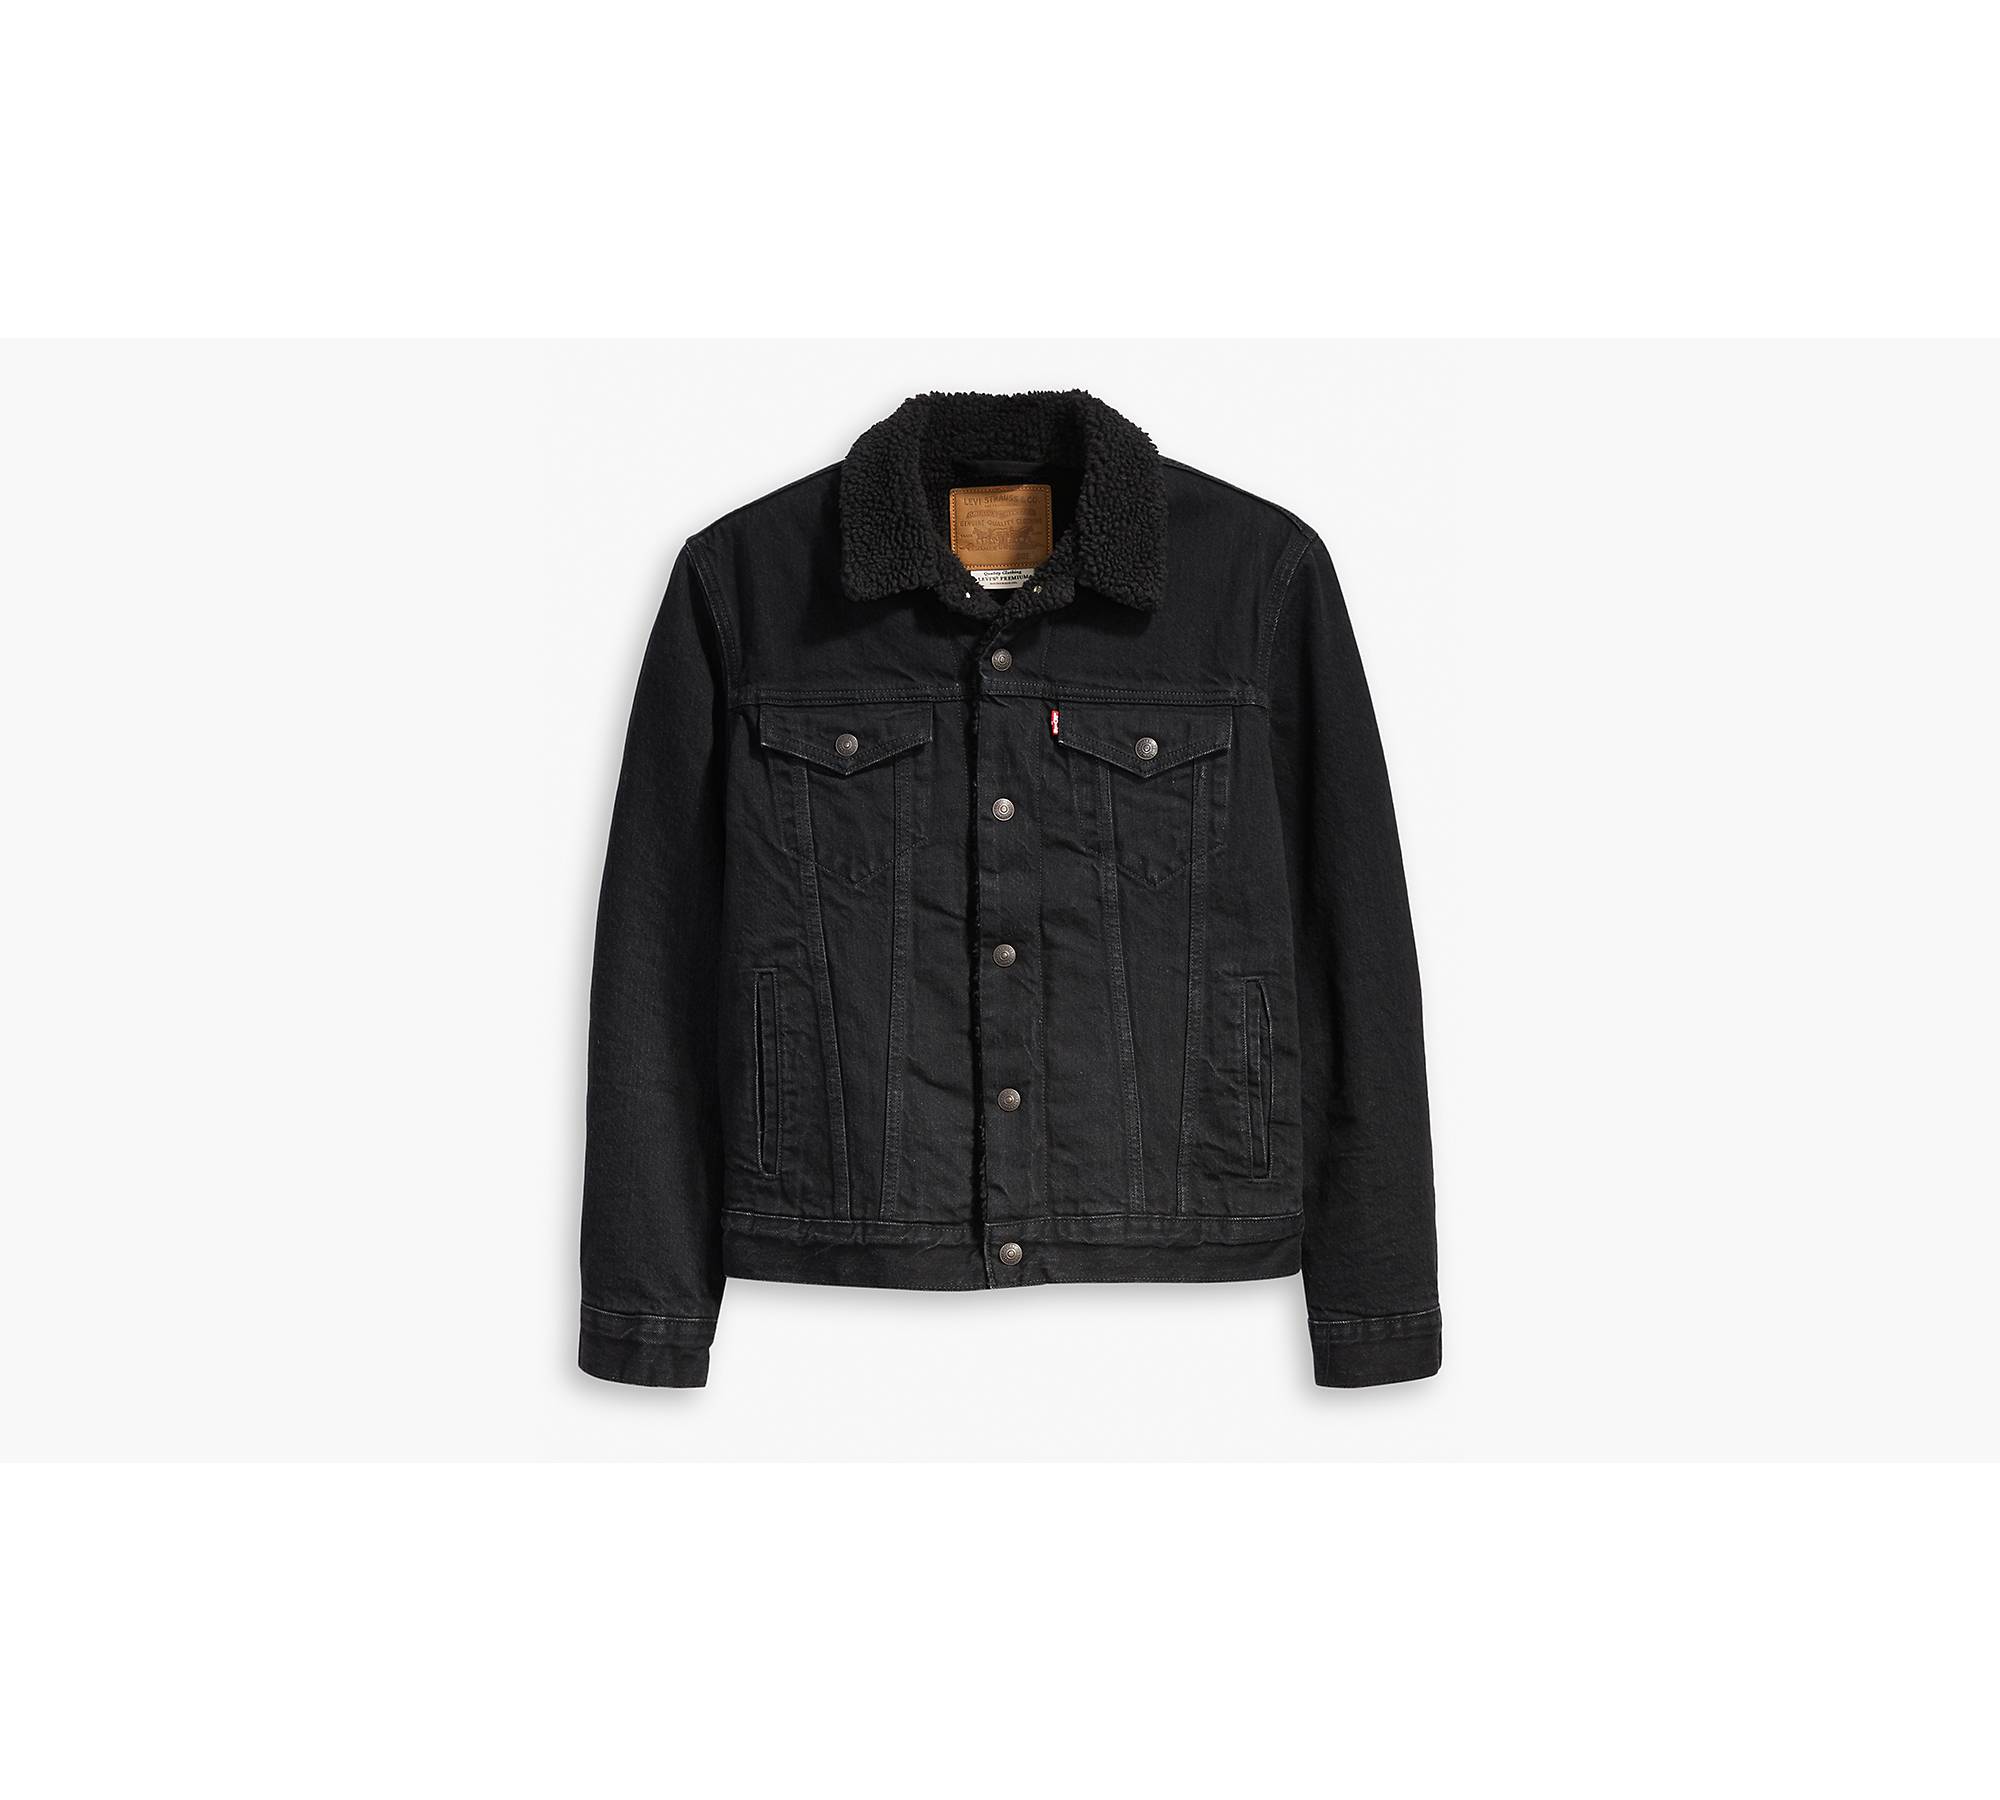 The Levi's Sherpa Trucker Jacket Is on Sale Starting at $61 - Men's Journal